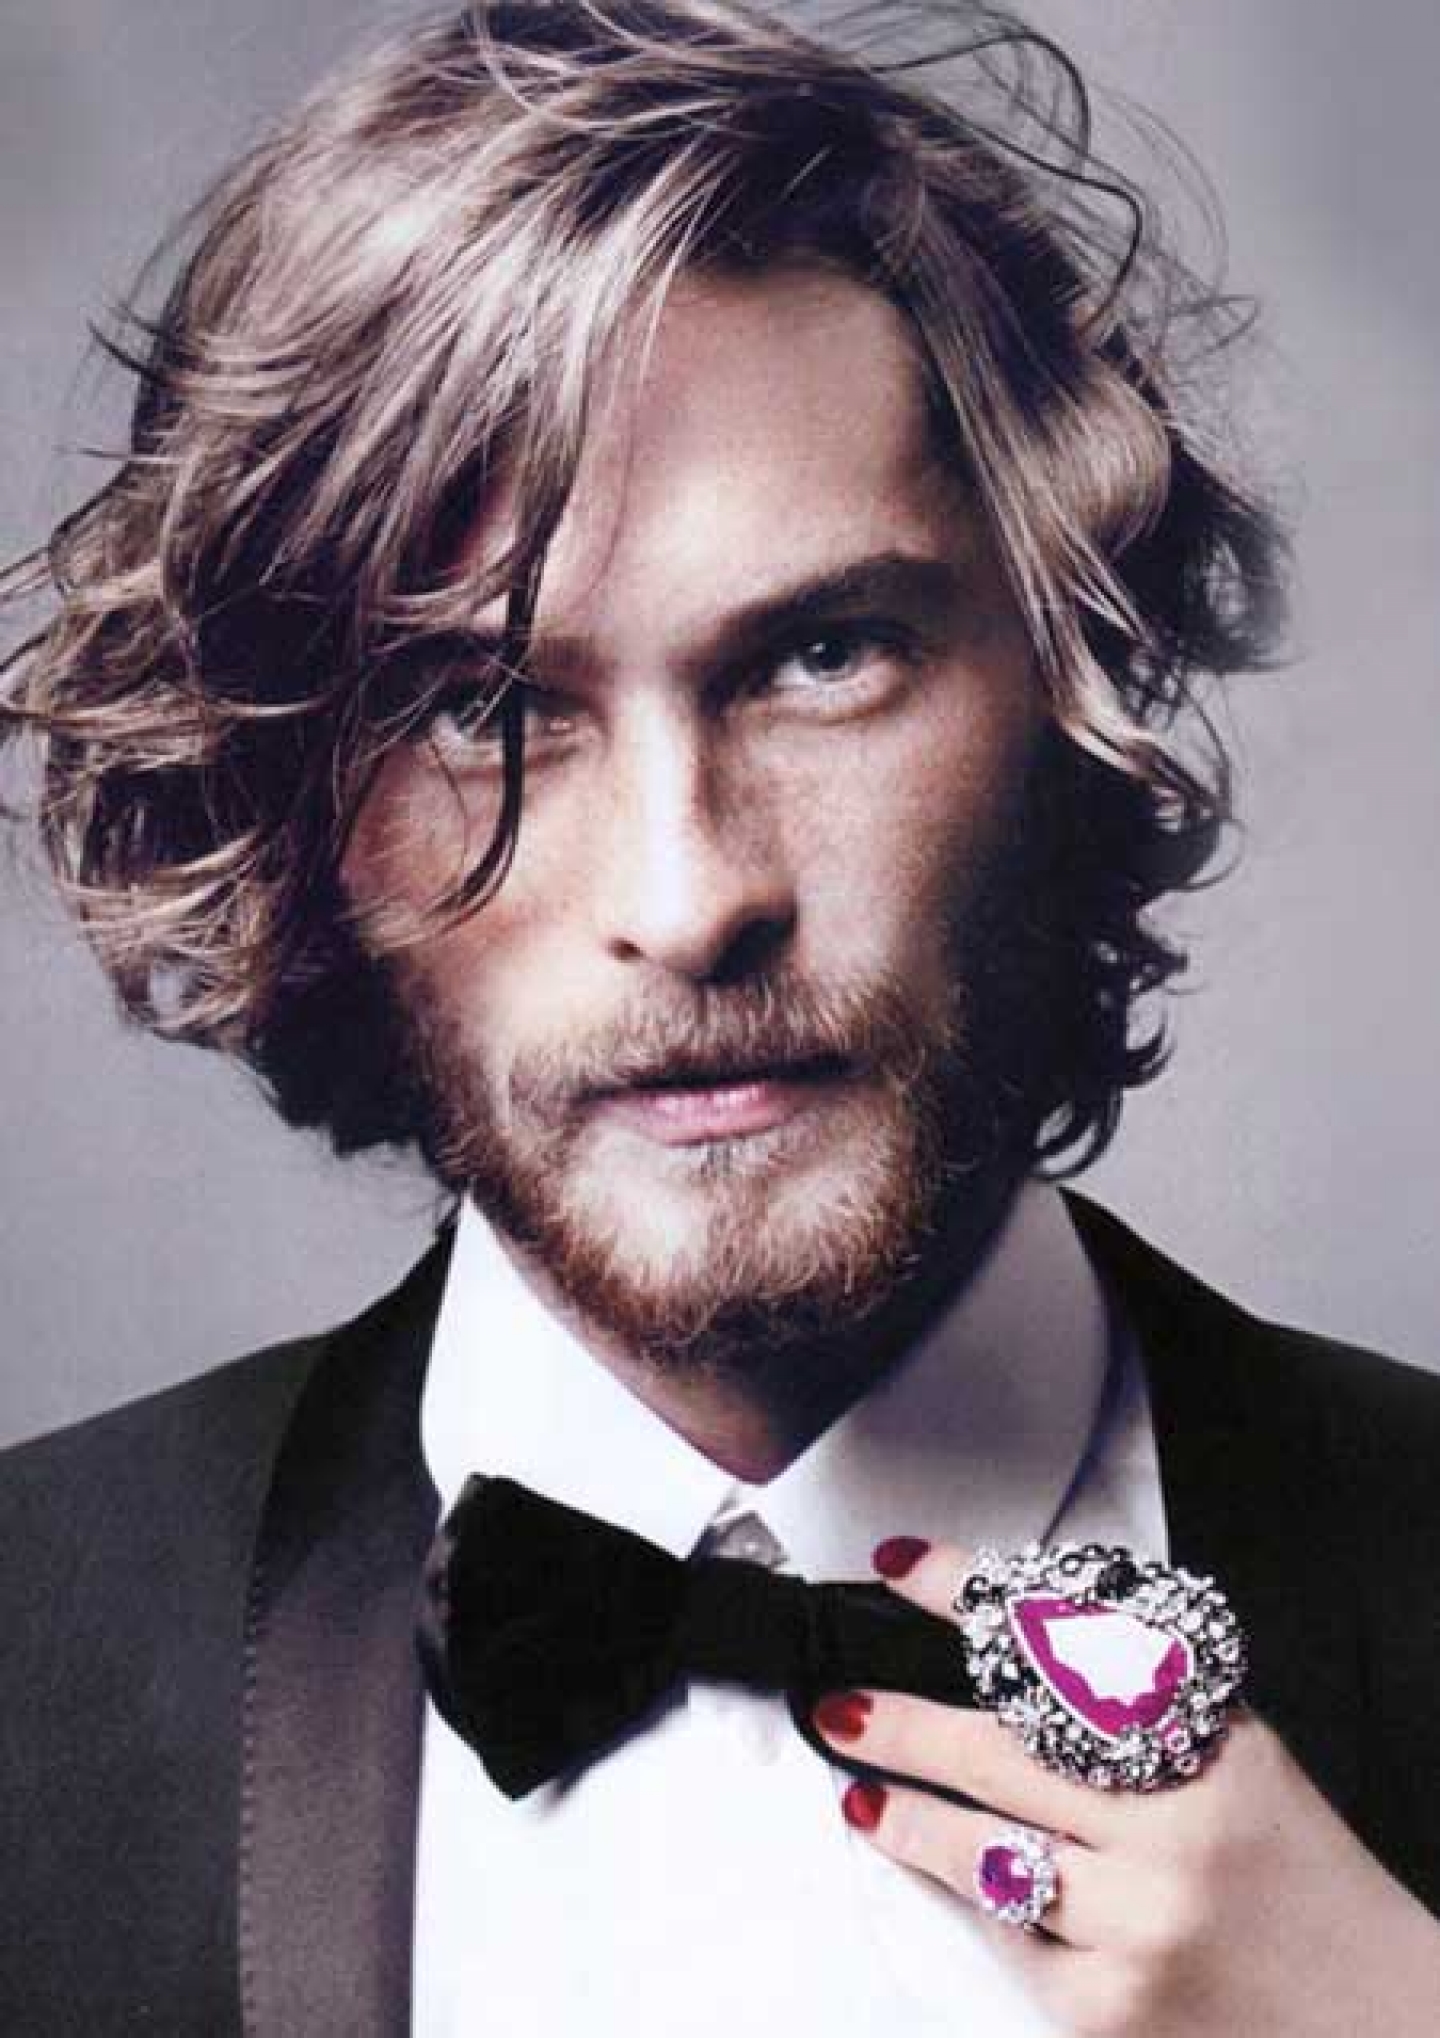 Curly Long Hair Mens Style - Curly Hair Style